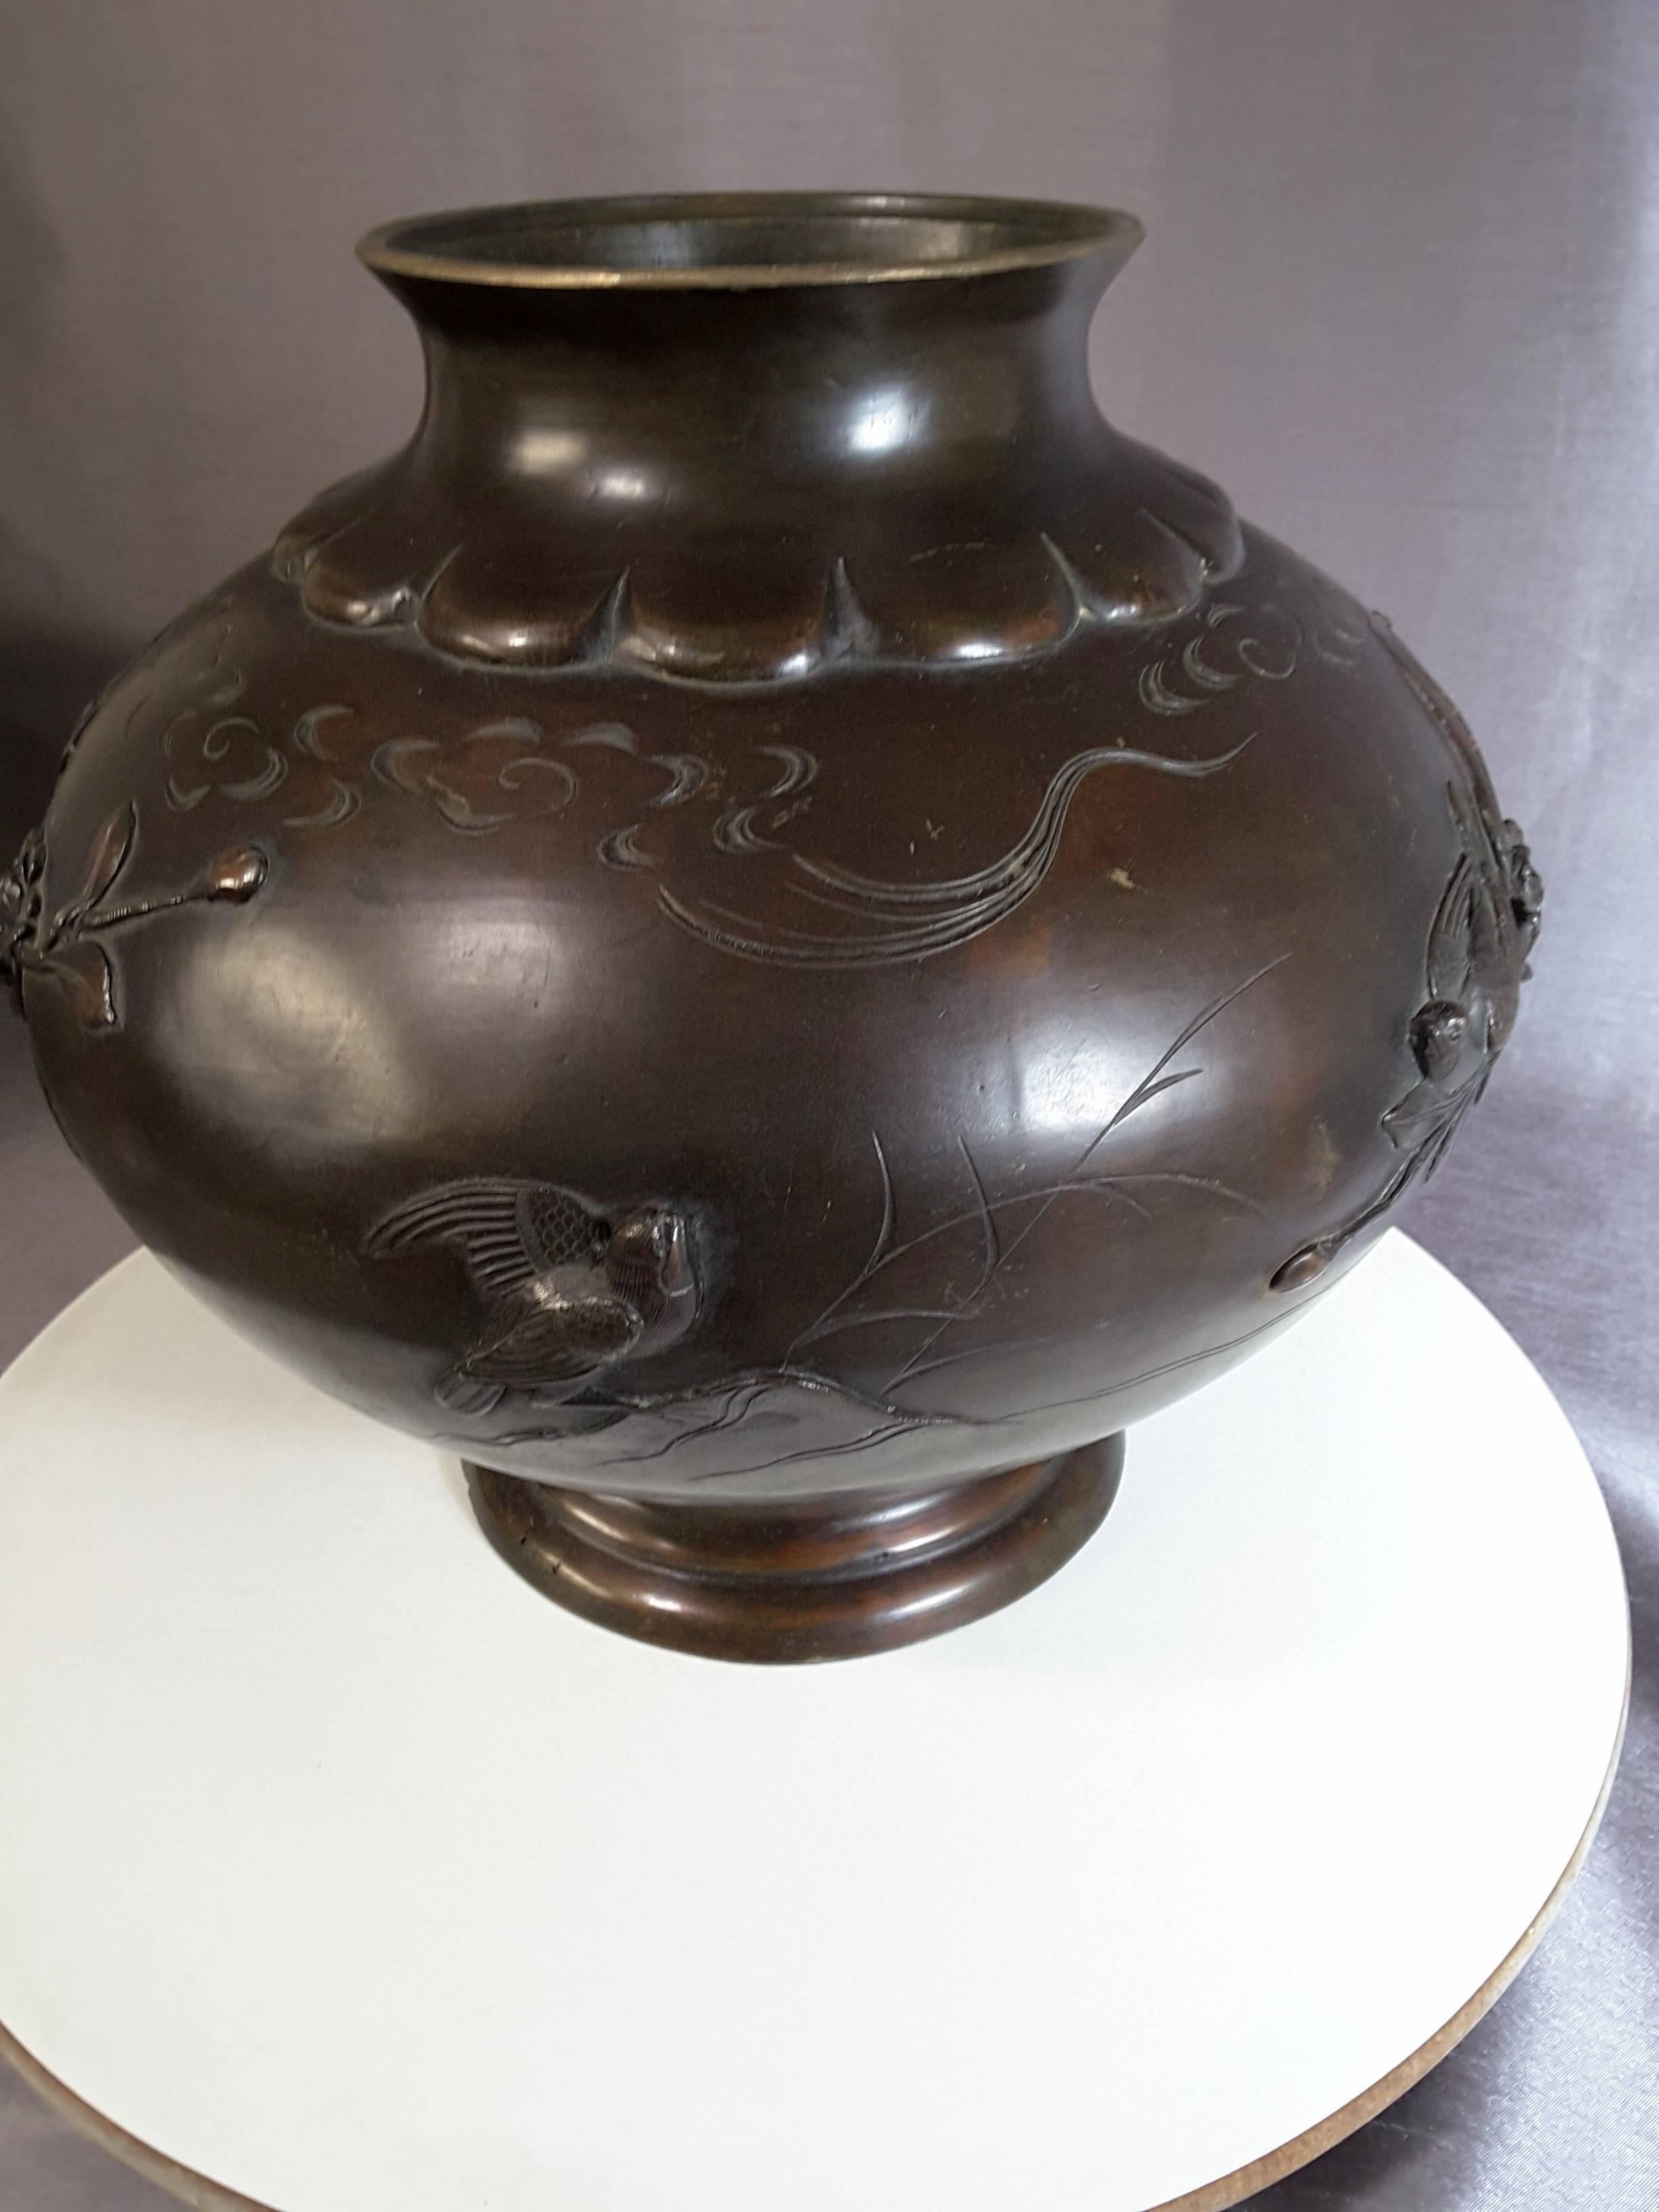 19th Century Meiji Period Japanese Bronze Vase with Raised Birds, Branches and Foliage